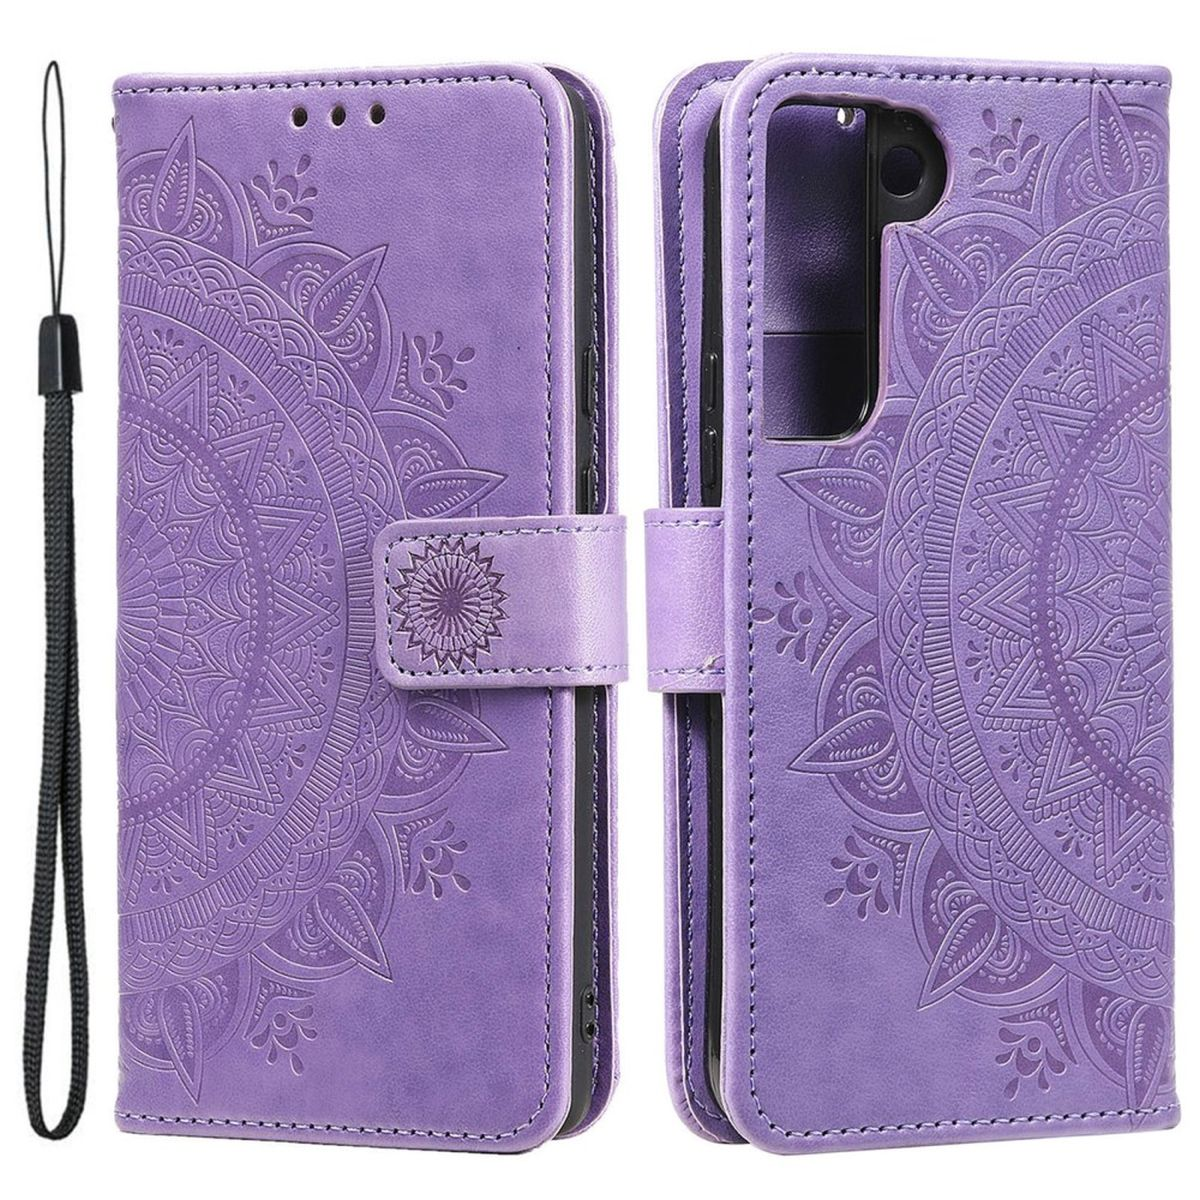 COVERKINGZ Klapphülle mit Mandala Galaxy Muster, S22 Bookcover, 5G, Lila Samsung